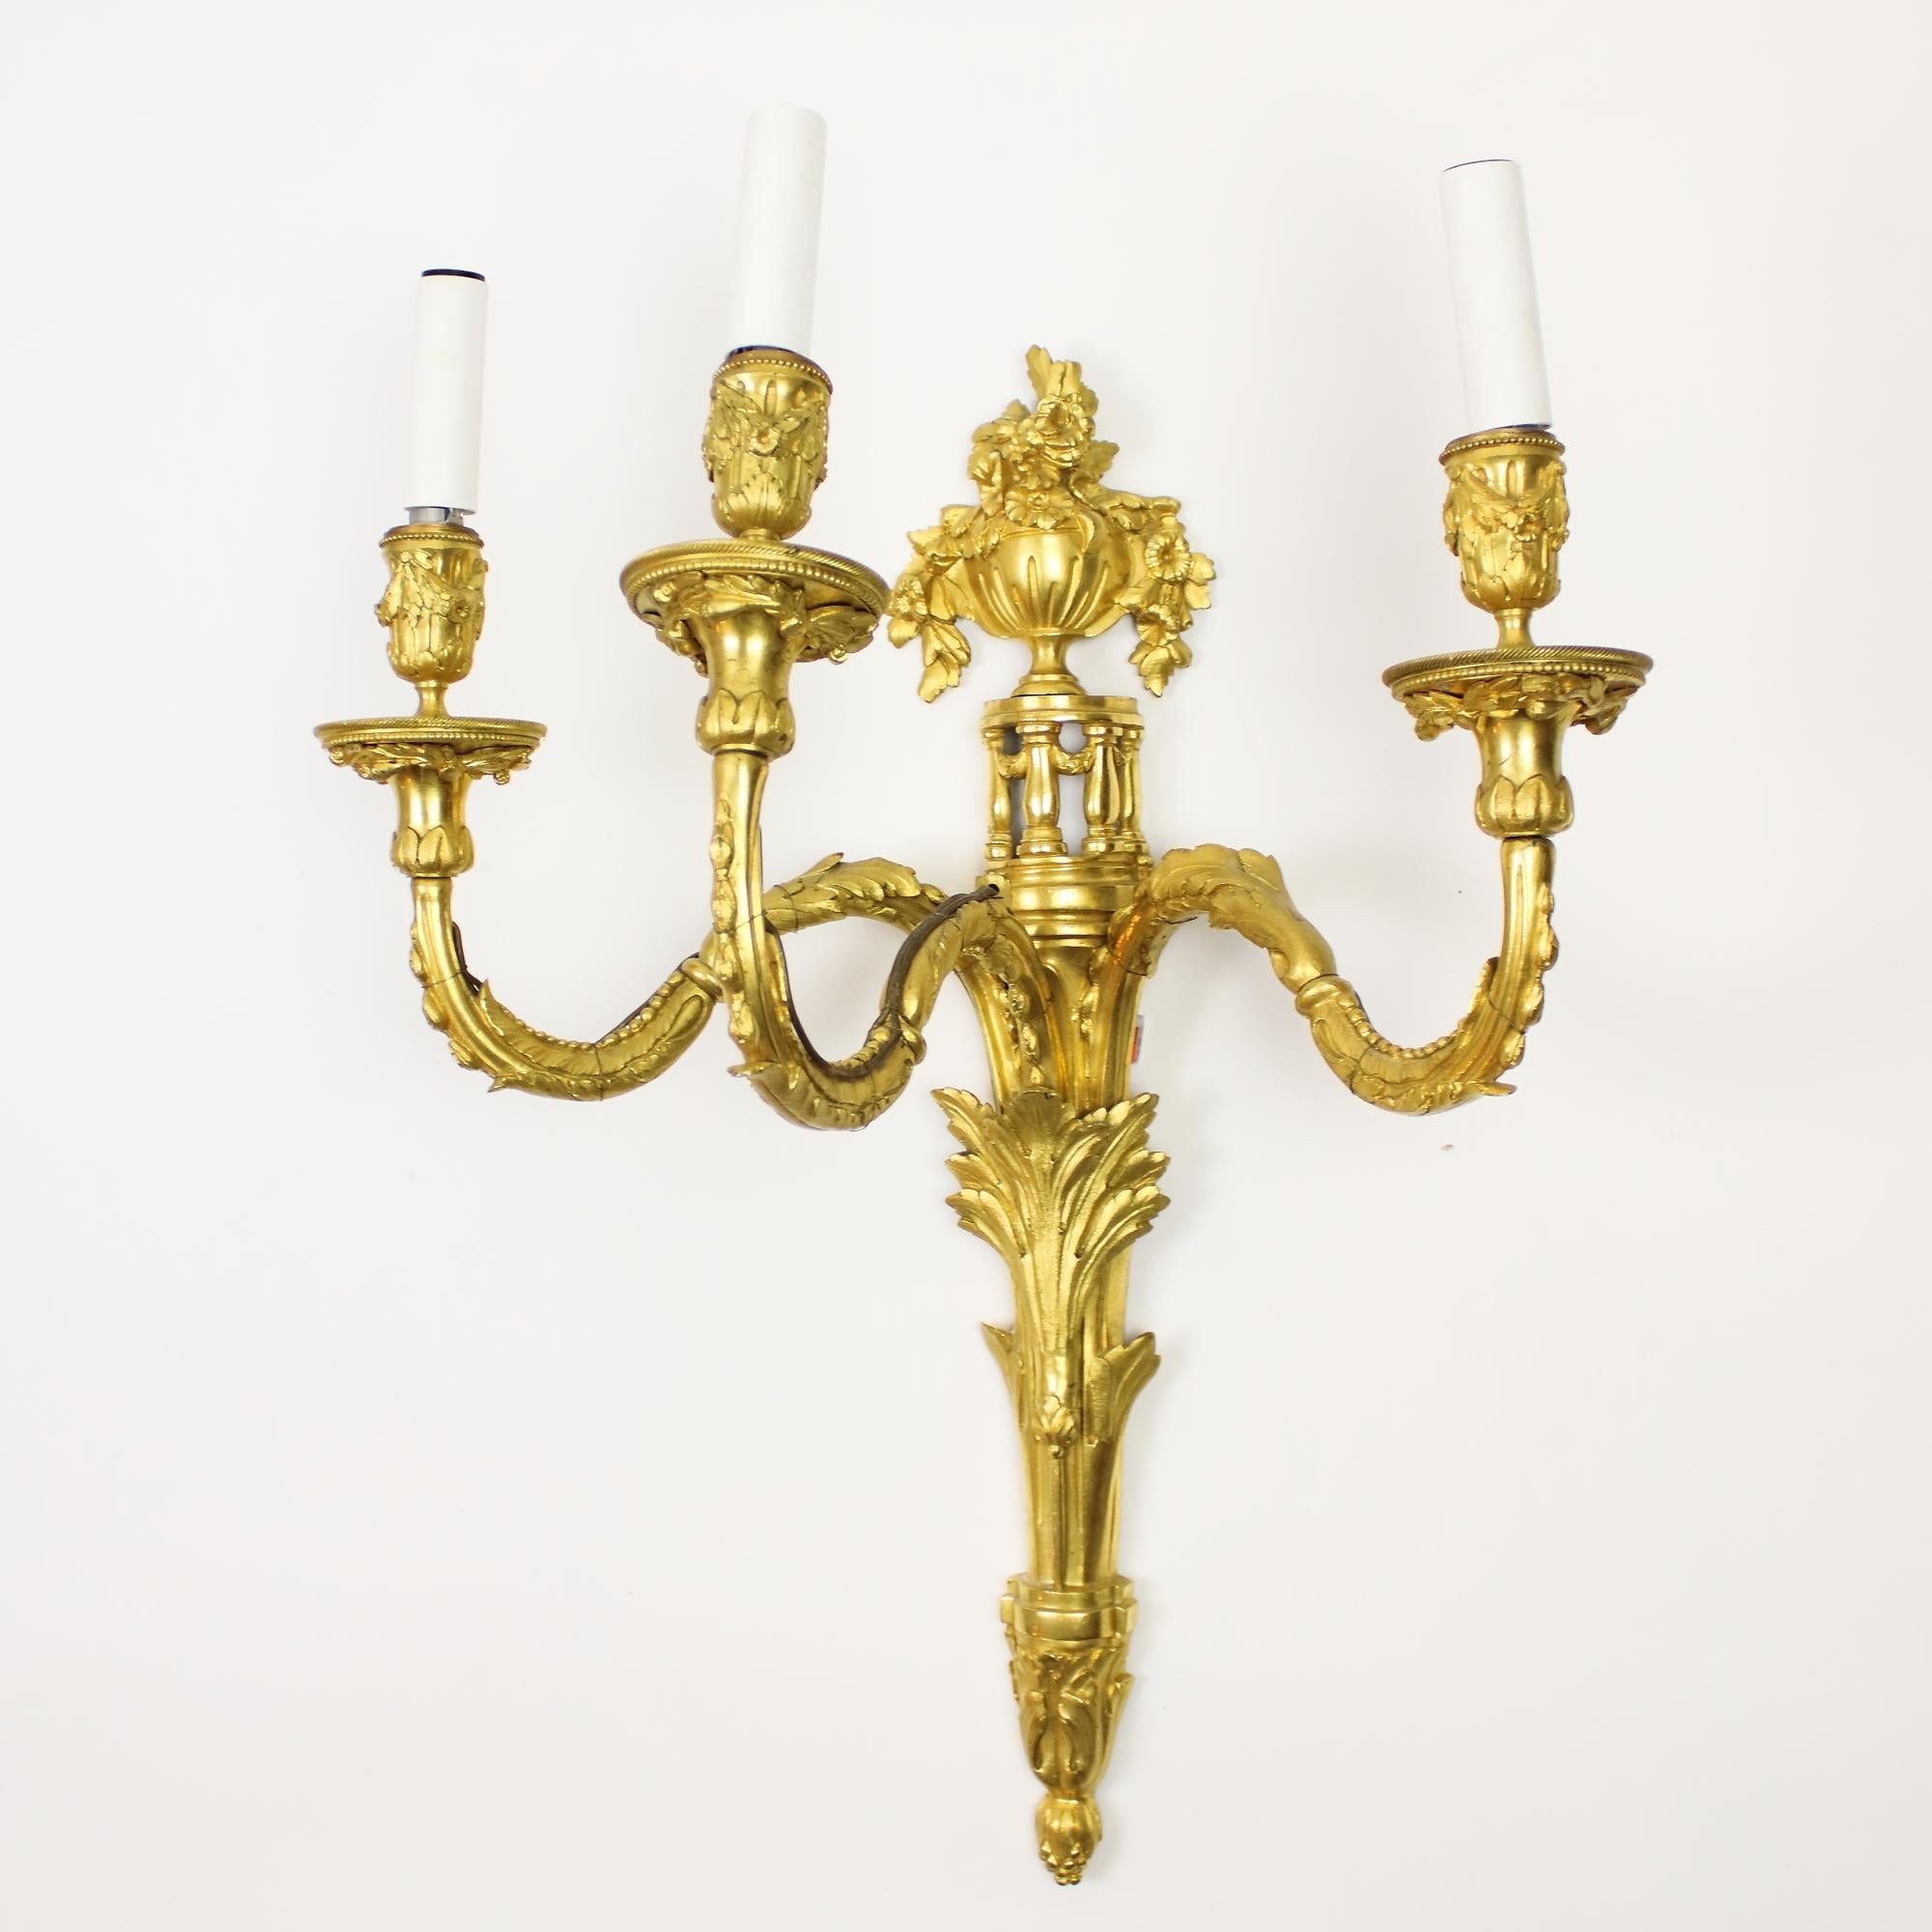 Large pair of French Louis XVI gilt bronze three-light sconces or wall lights

A pair of 19th century gilt bronze wall-lights or sconces, each with a foliage ornamented back plate surmounted by a pierced baluster gallery, supporting a neoclassical